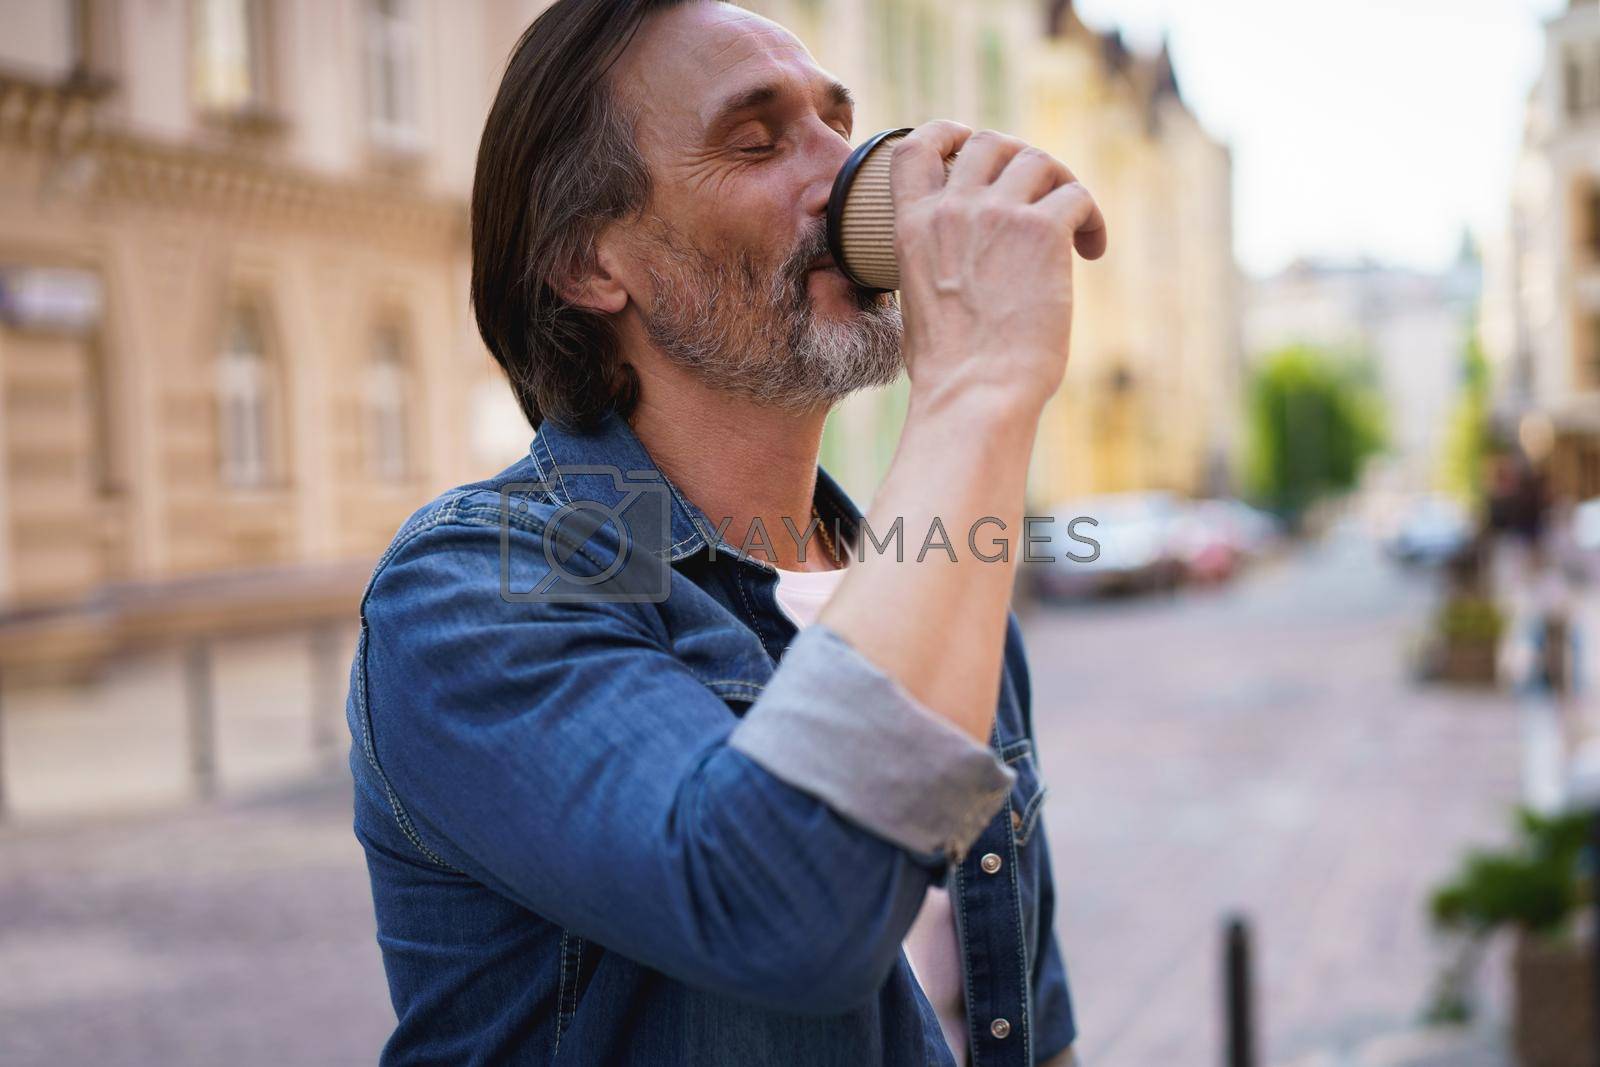 Royalty free image of Enjoying his coffee handsome middle aged man with grey beard standing in the city drink take away coffee from paper cup. Handsome man traveling enjoying free time. Business travel concept by LipikStockMedia